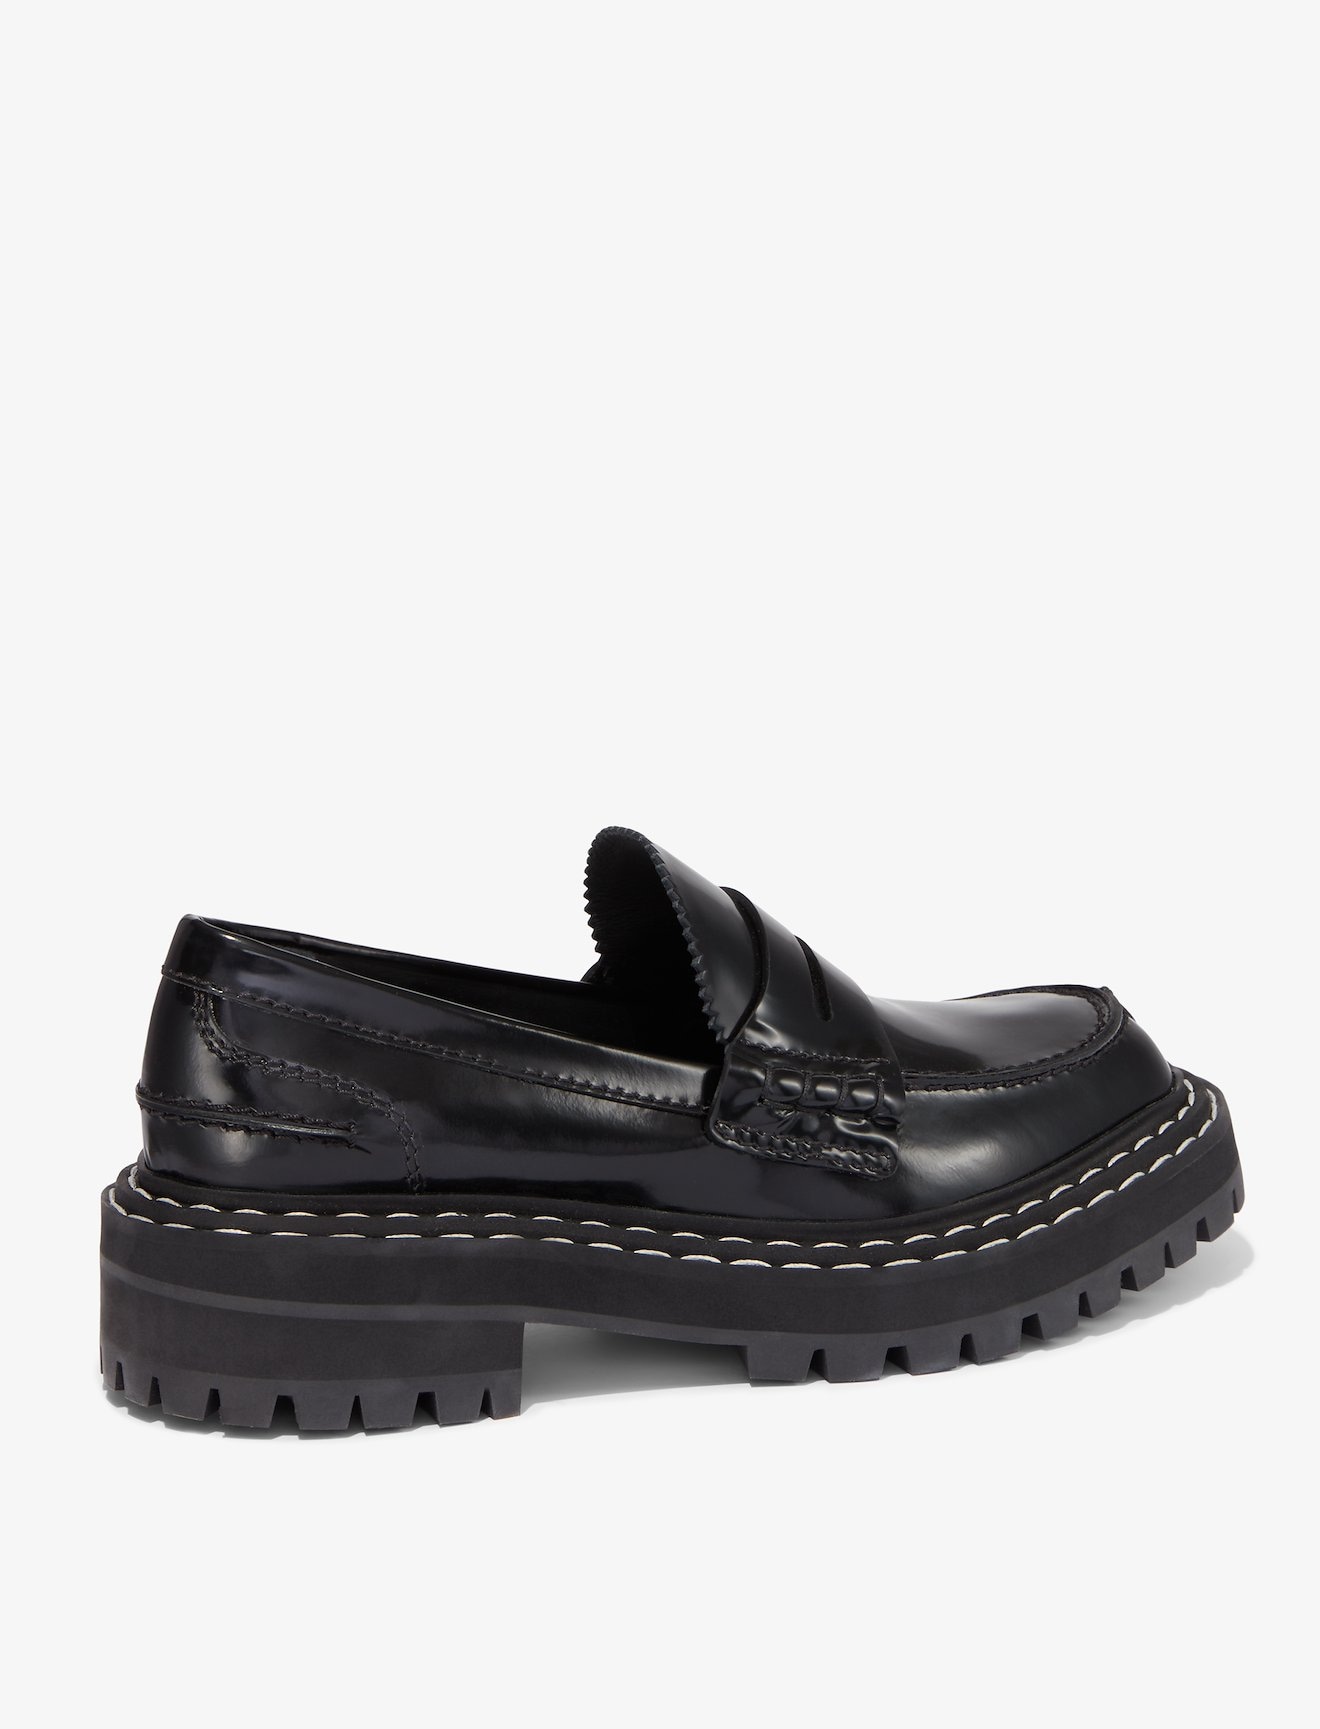 Proenza Schouler -Lug Sole Loafers | Official Site